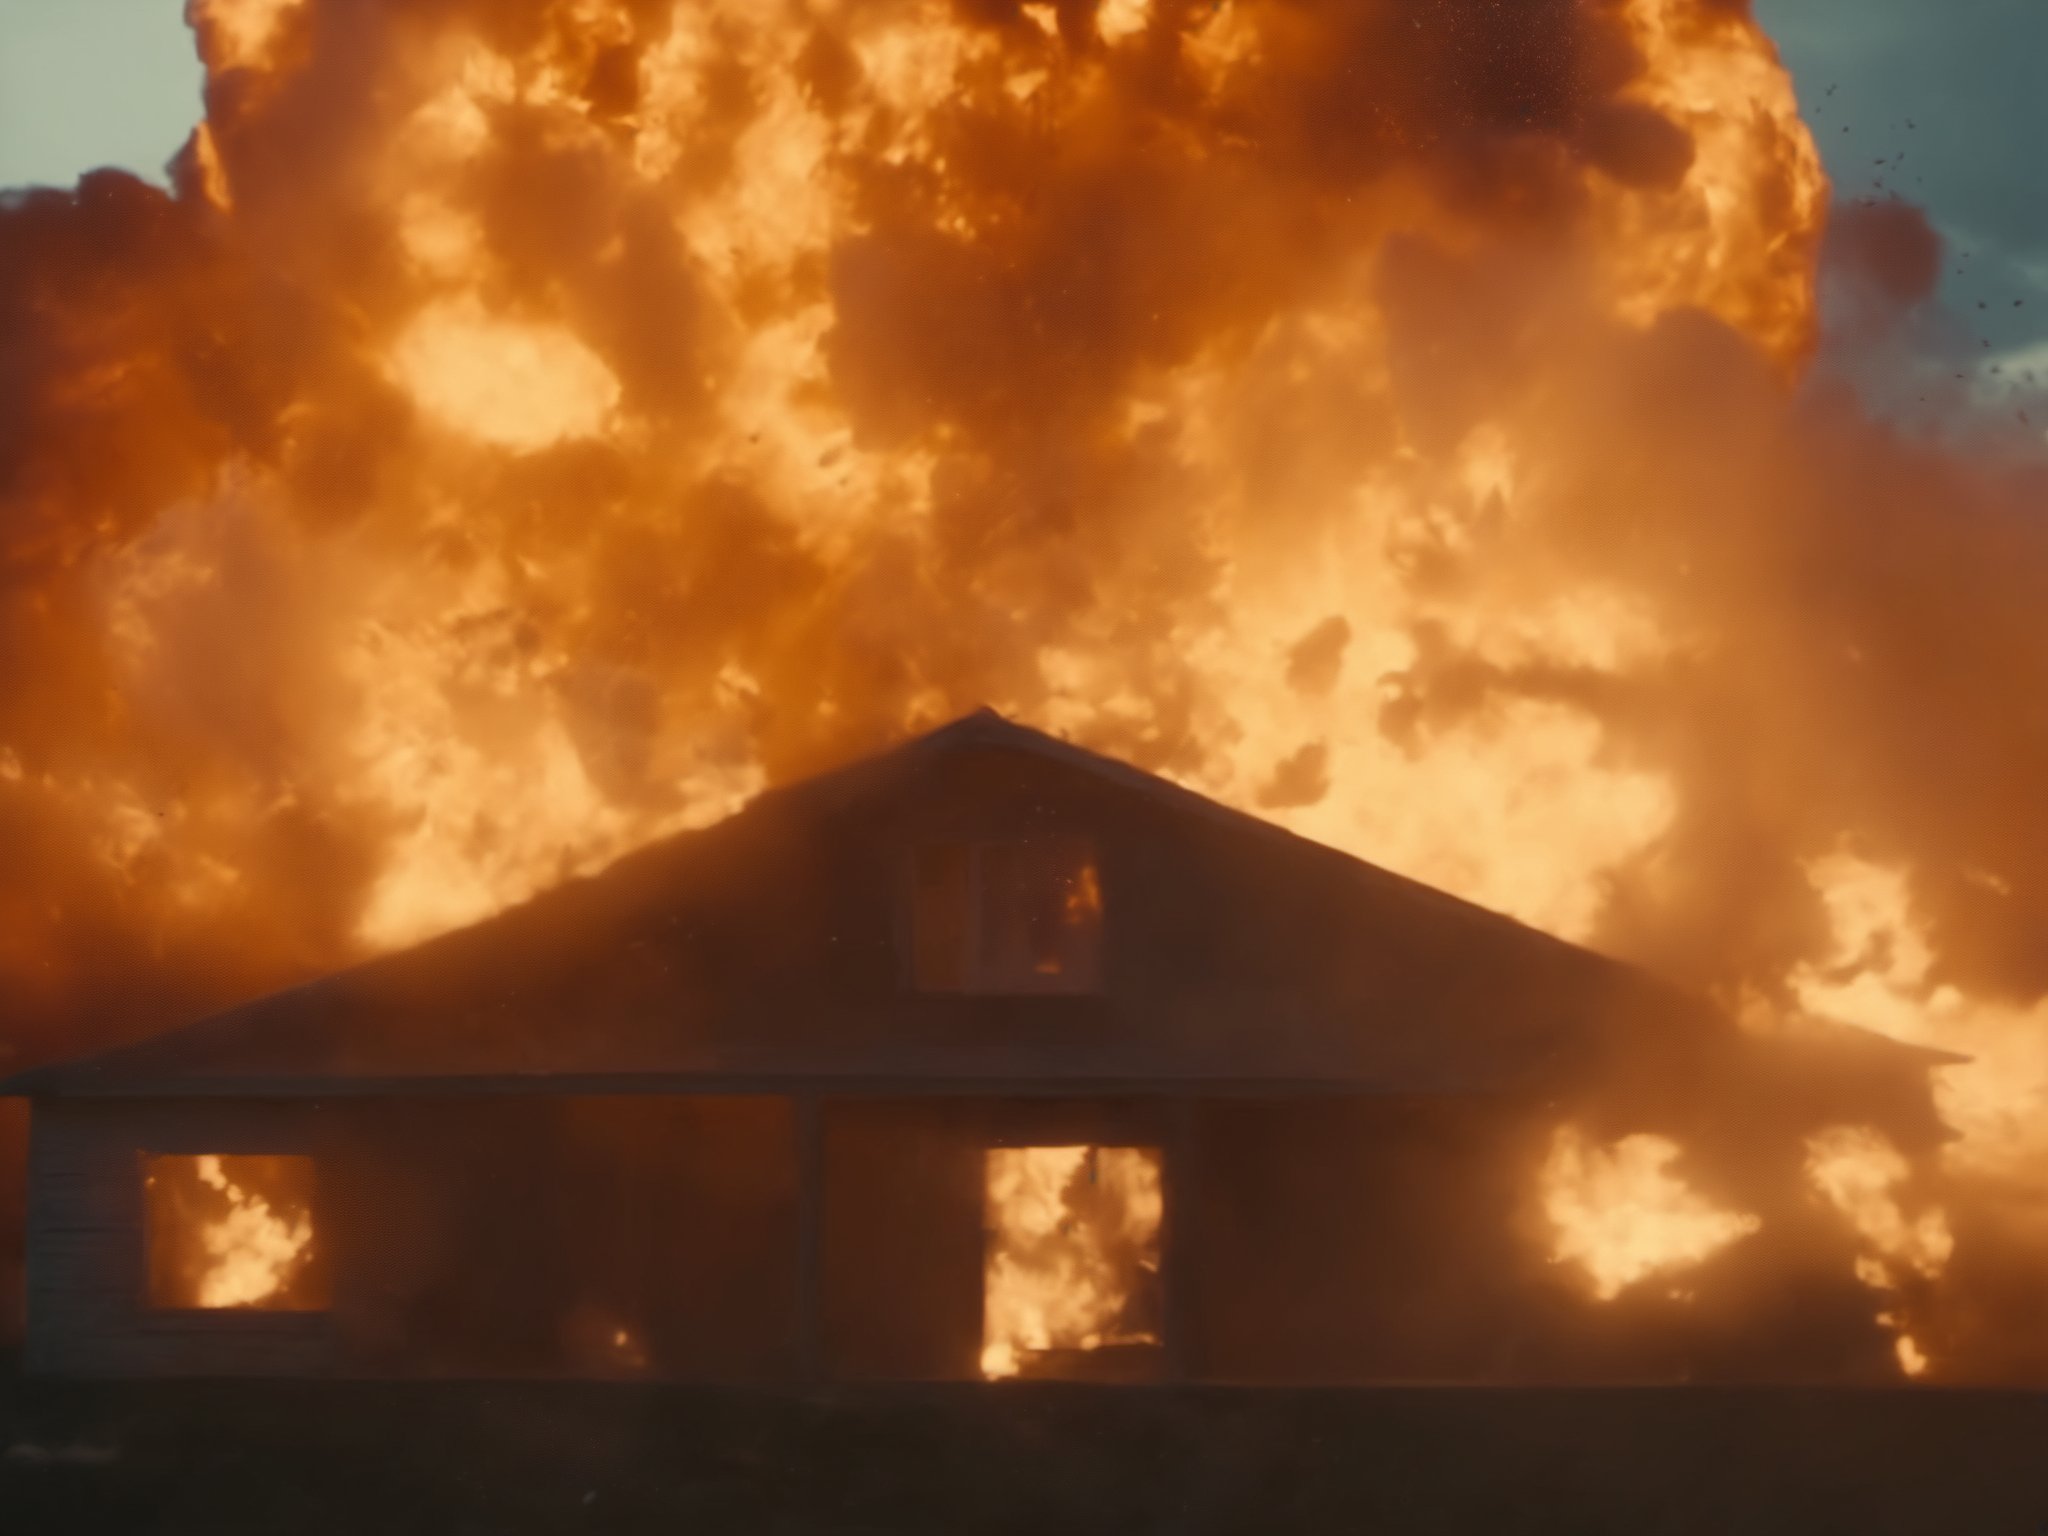 (m0vieexpl0sion), cinematic still of a house, (small explosion:0.7), far view, sky, cloud, best picture, best quality, UHD, oscar winner, directed by Christopher Nolan, shot on Canon camera, cinematic lighting